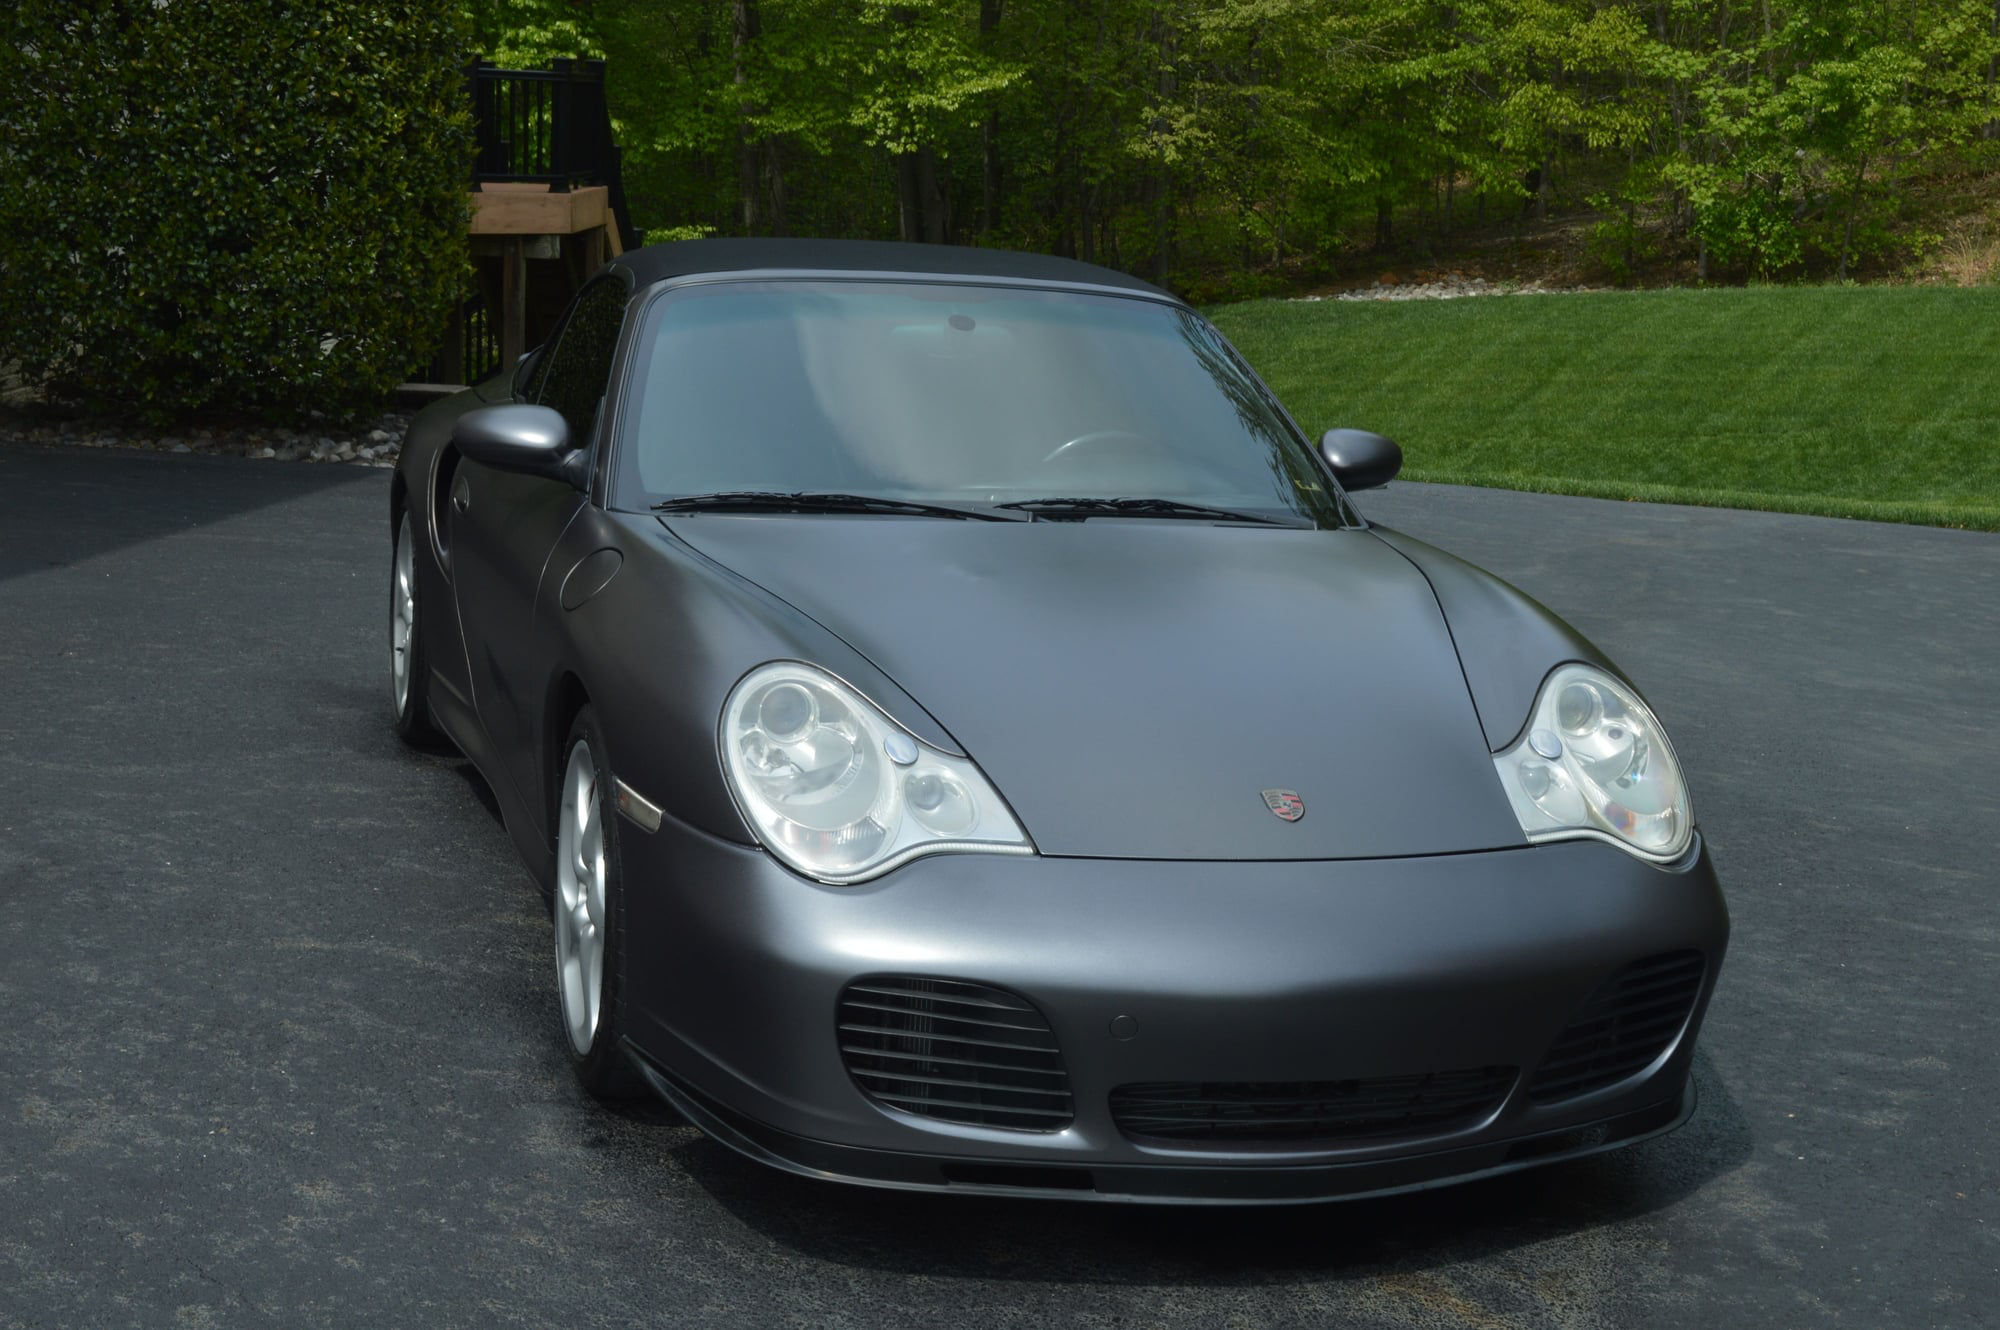 2004 Porsche 911 - 2004 Porsche 911 X-50 Turbo - 6SPD Cabriolet - Used - Perry Hall, MD 21128, United States